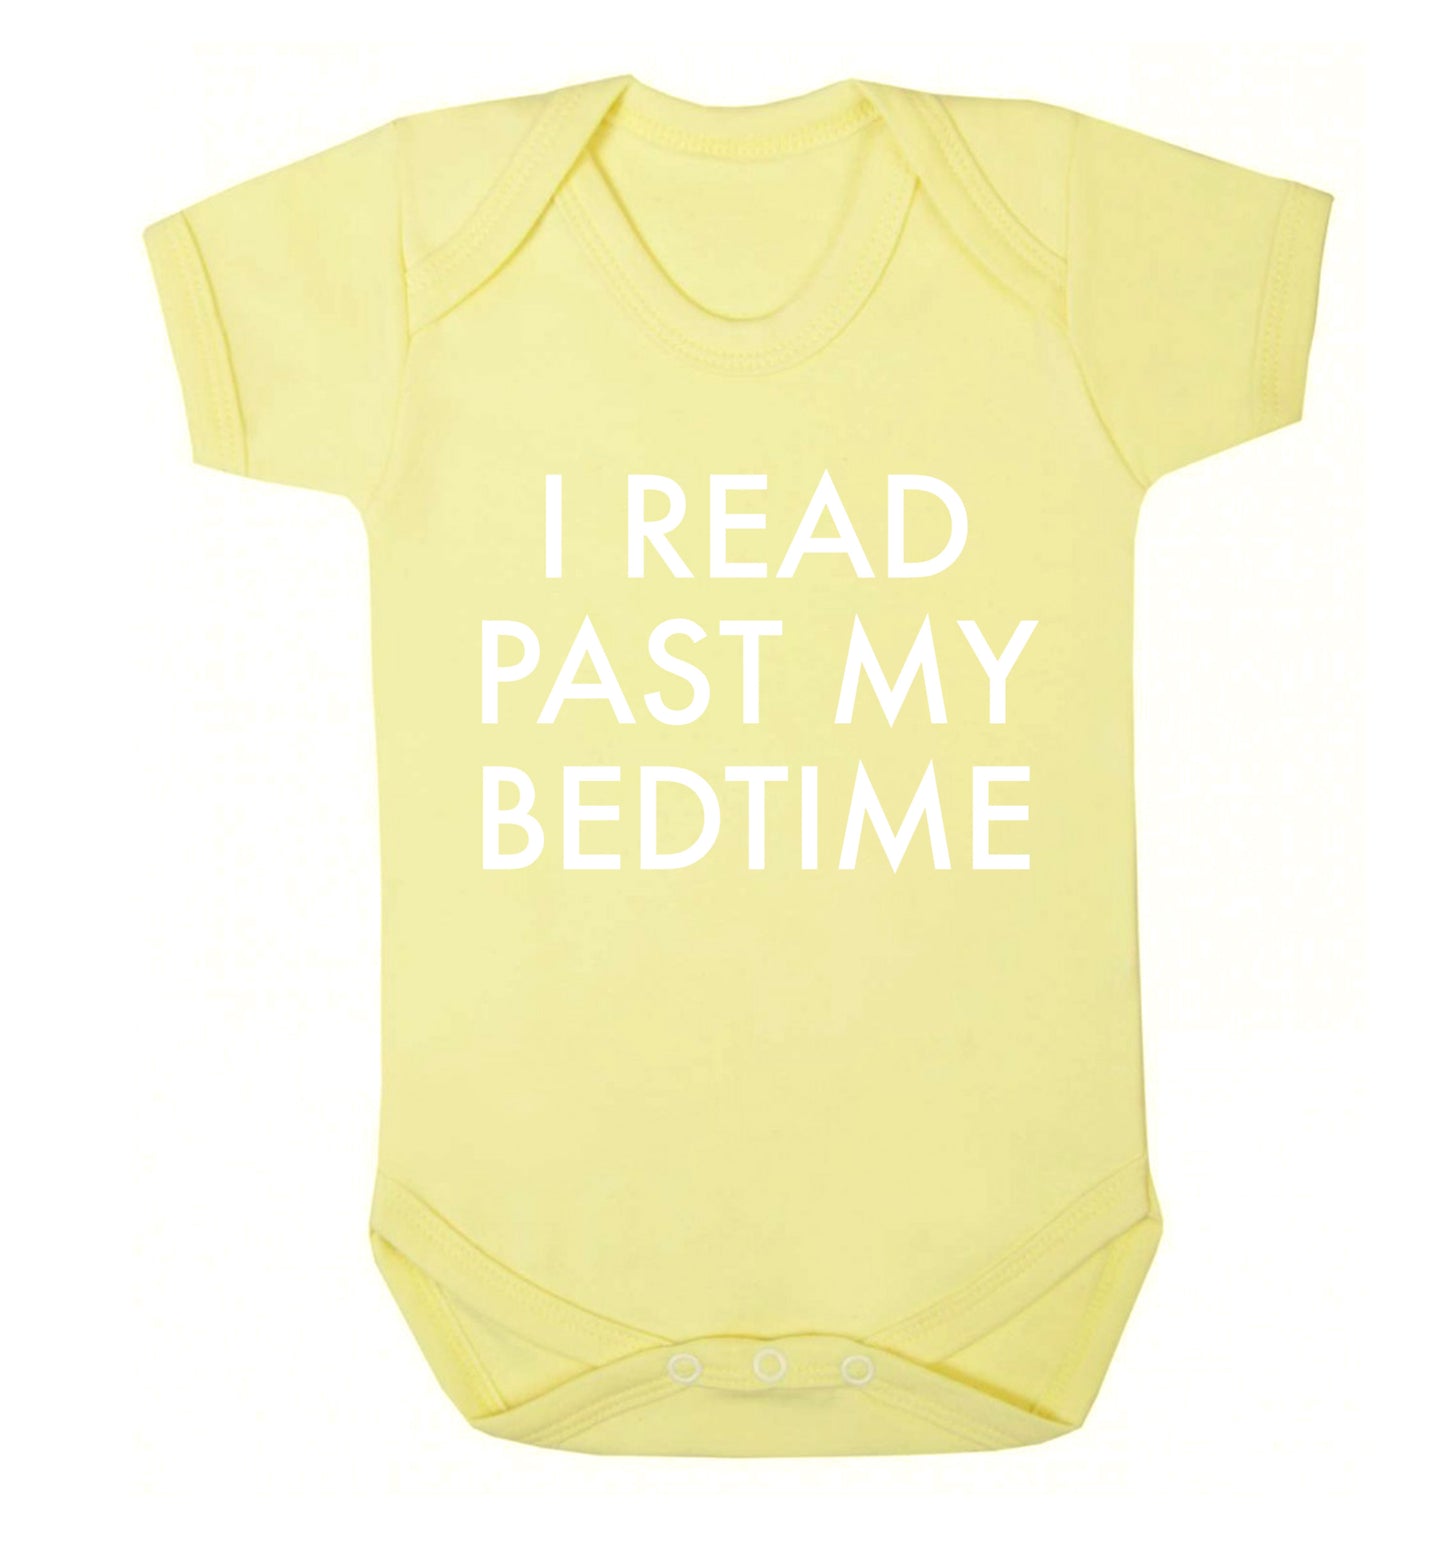 I read past my bedtime Baby Vest pale yellow 18-24 months